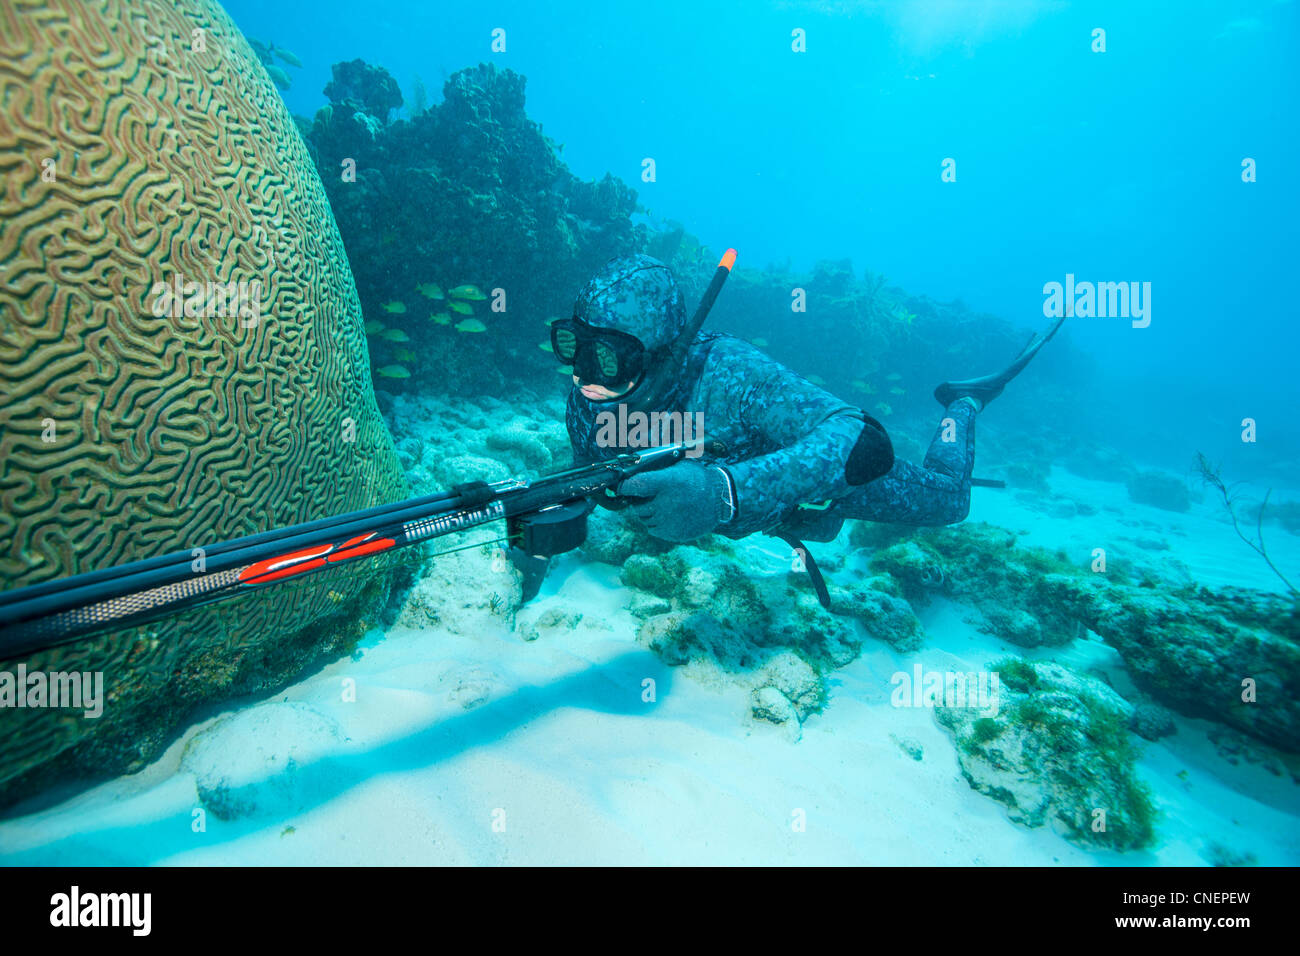 Underwater Fisherman In Full Equipment With Spear Fishing Gun Over White  Background Stock Photo, Picture and Royalty Free Image. Image 40811006.